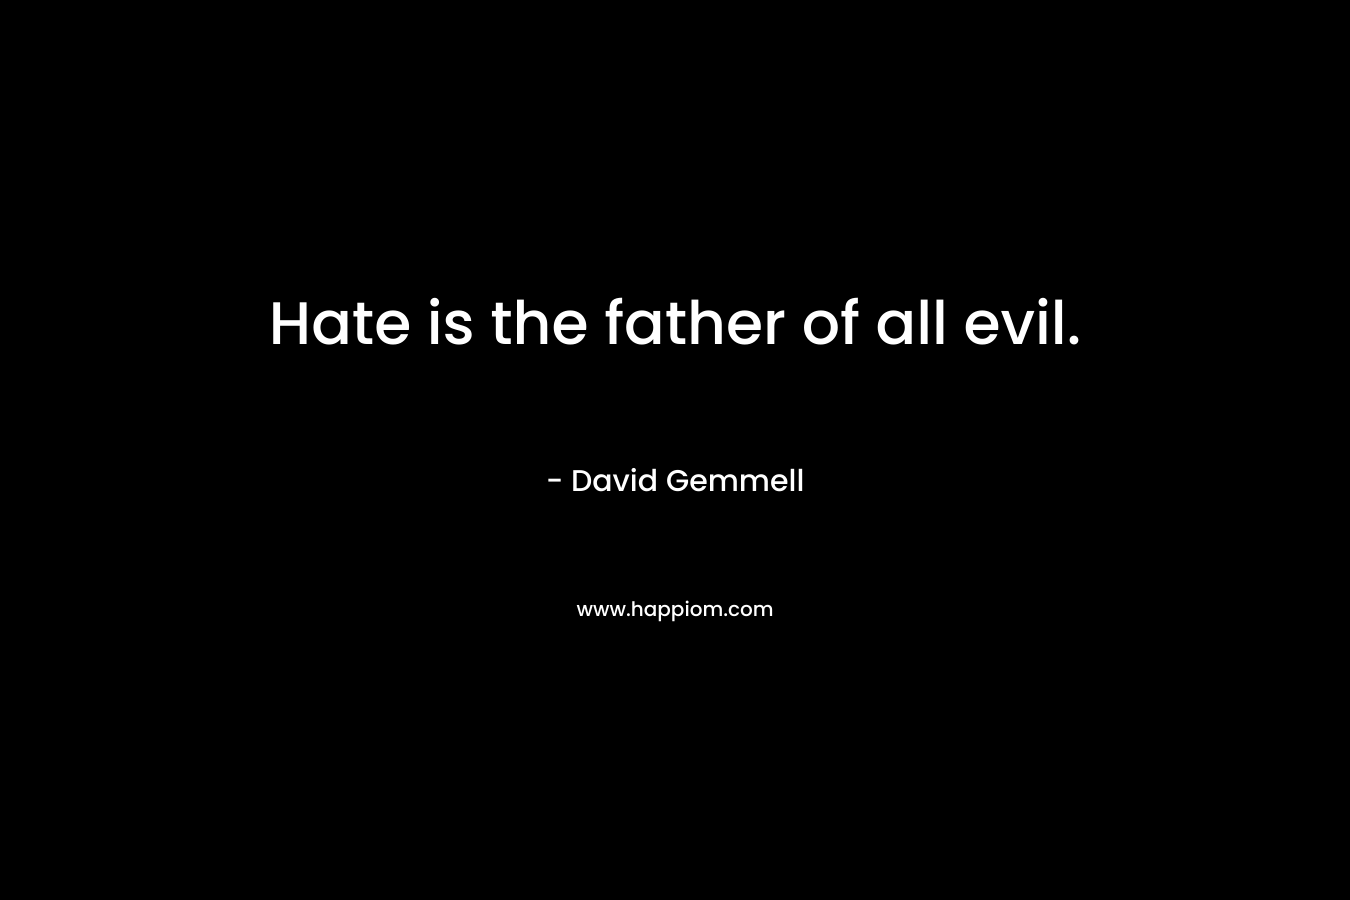 Hate is the father of all evil. – David Gemmell